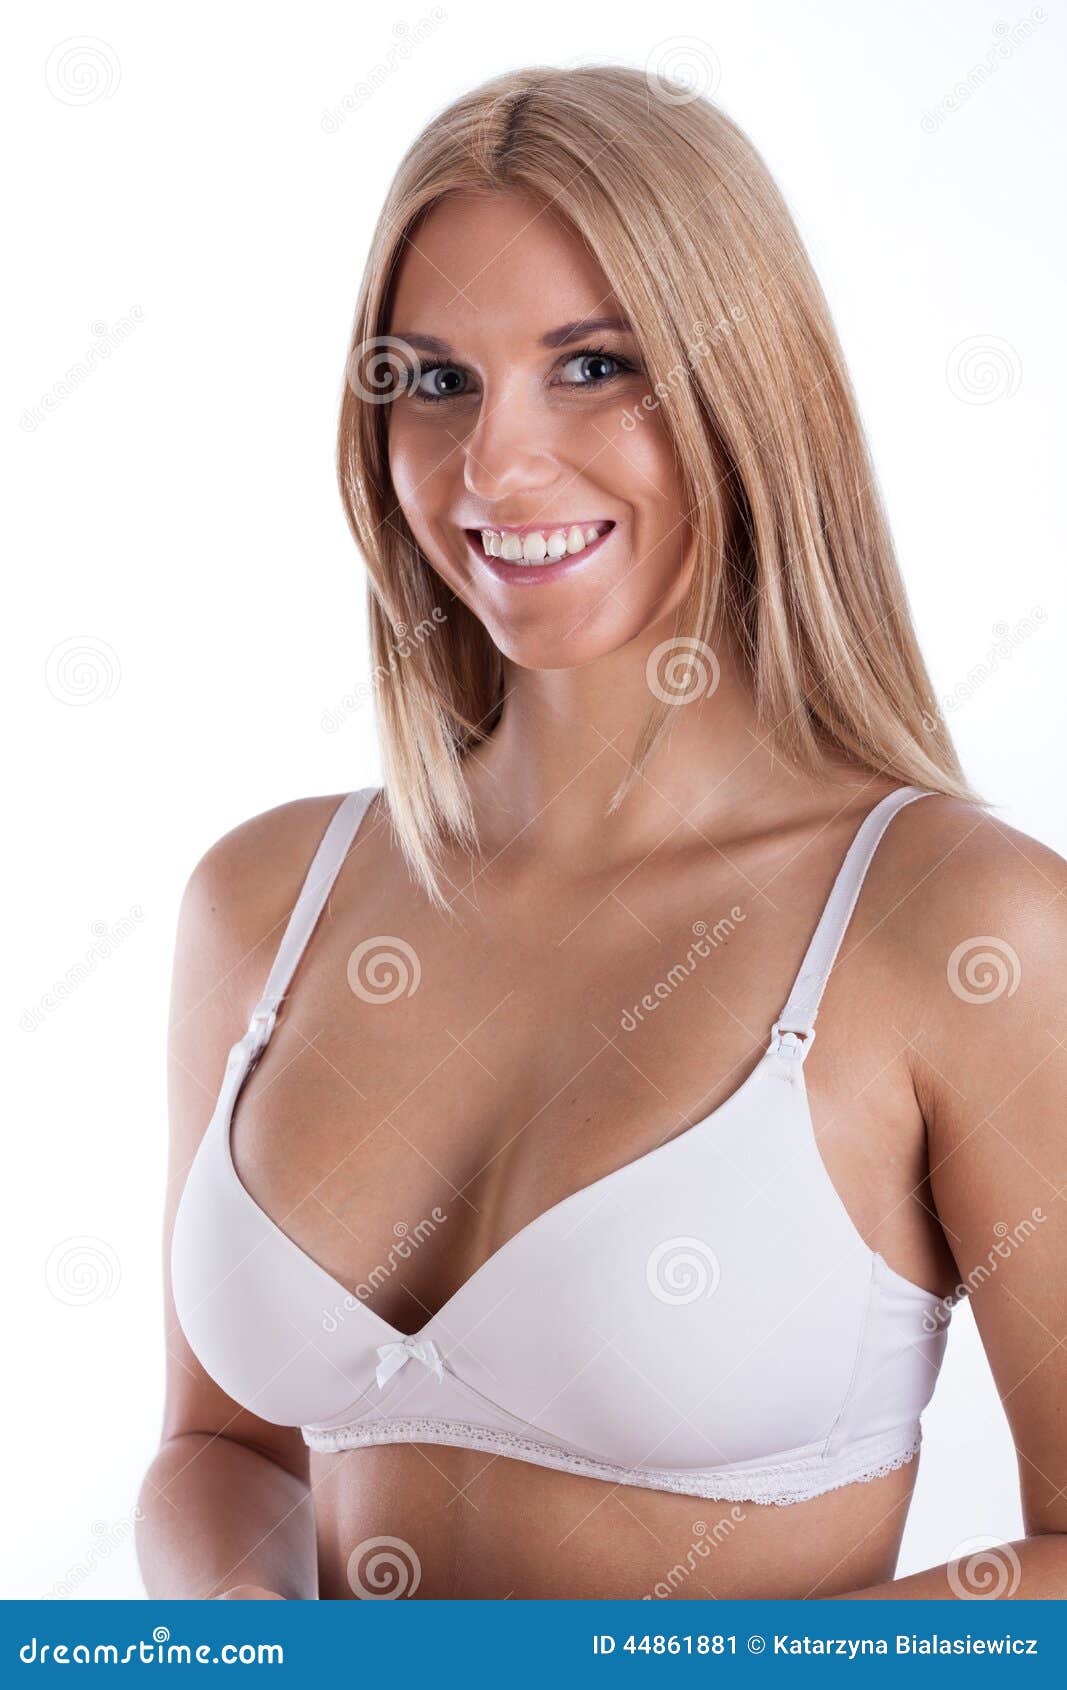 Smiling Woman In White Brassiere Stock Image Image Of Lingerie Body 44861881